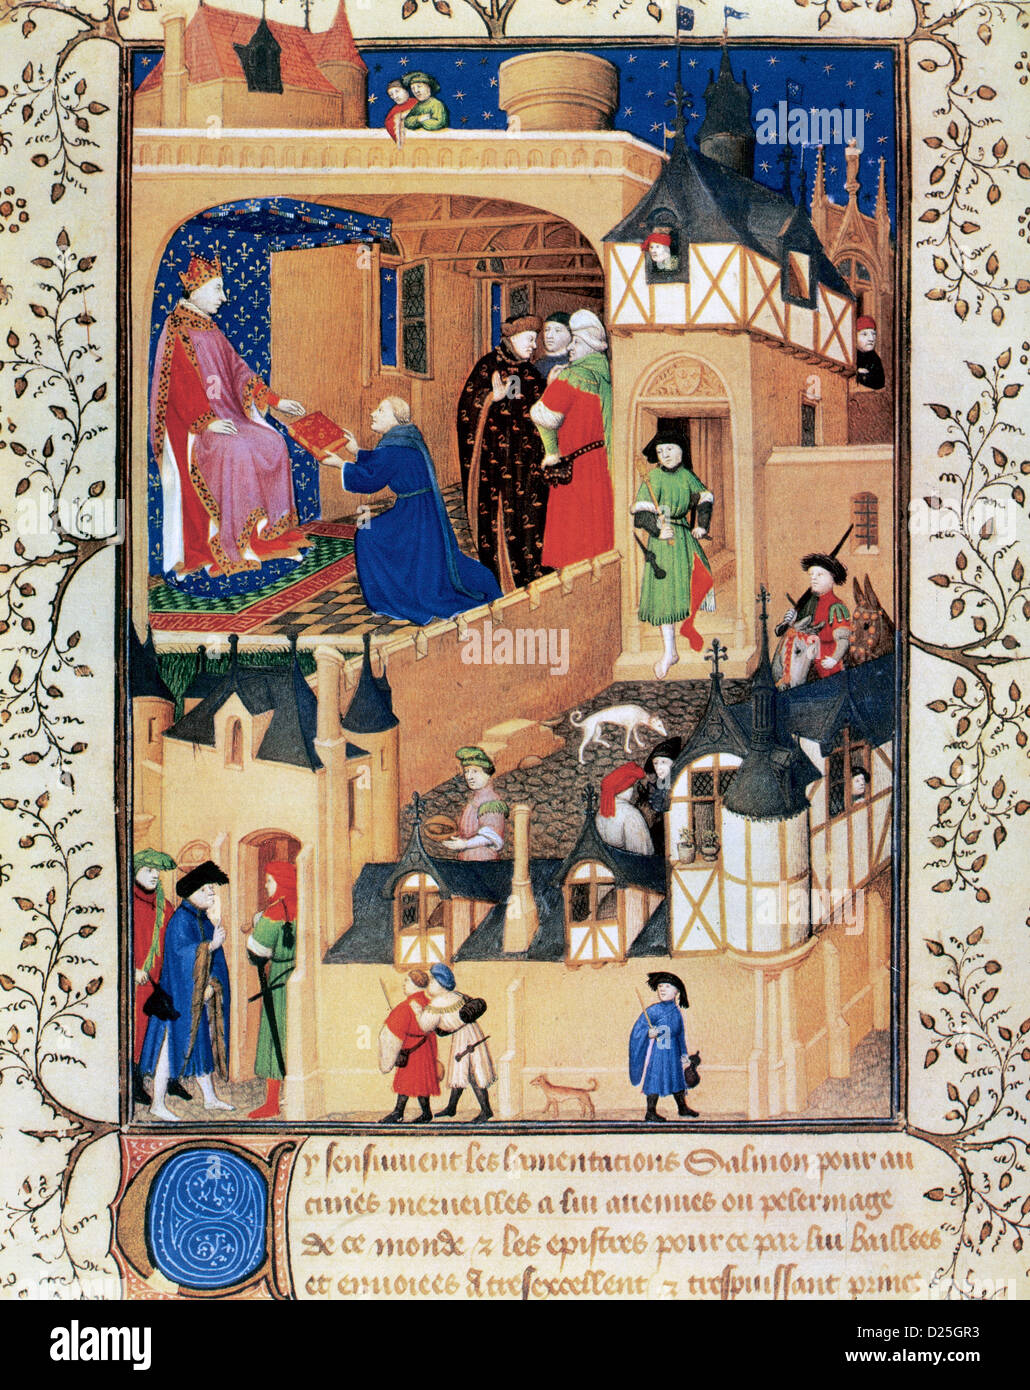 Pierre Salmon presents the manuscript to king Charles VI the Beloved. Miniature. 15th century. France National Library. Stock Photo